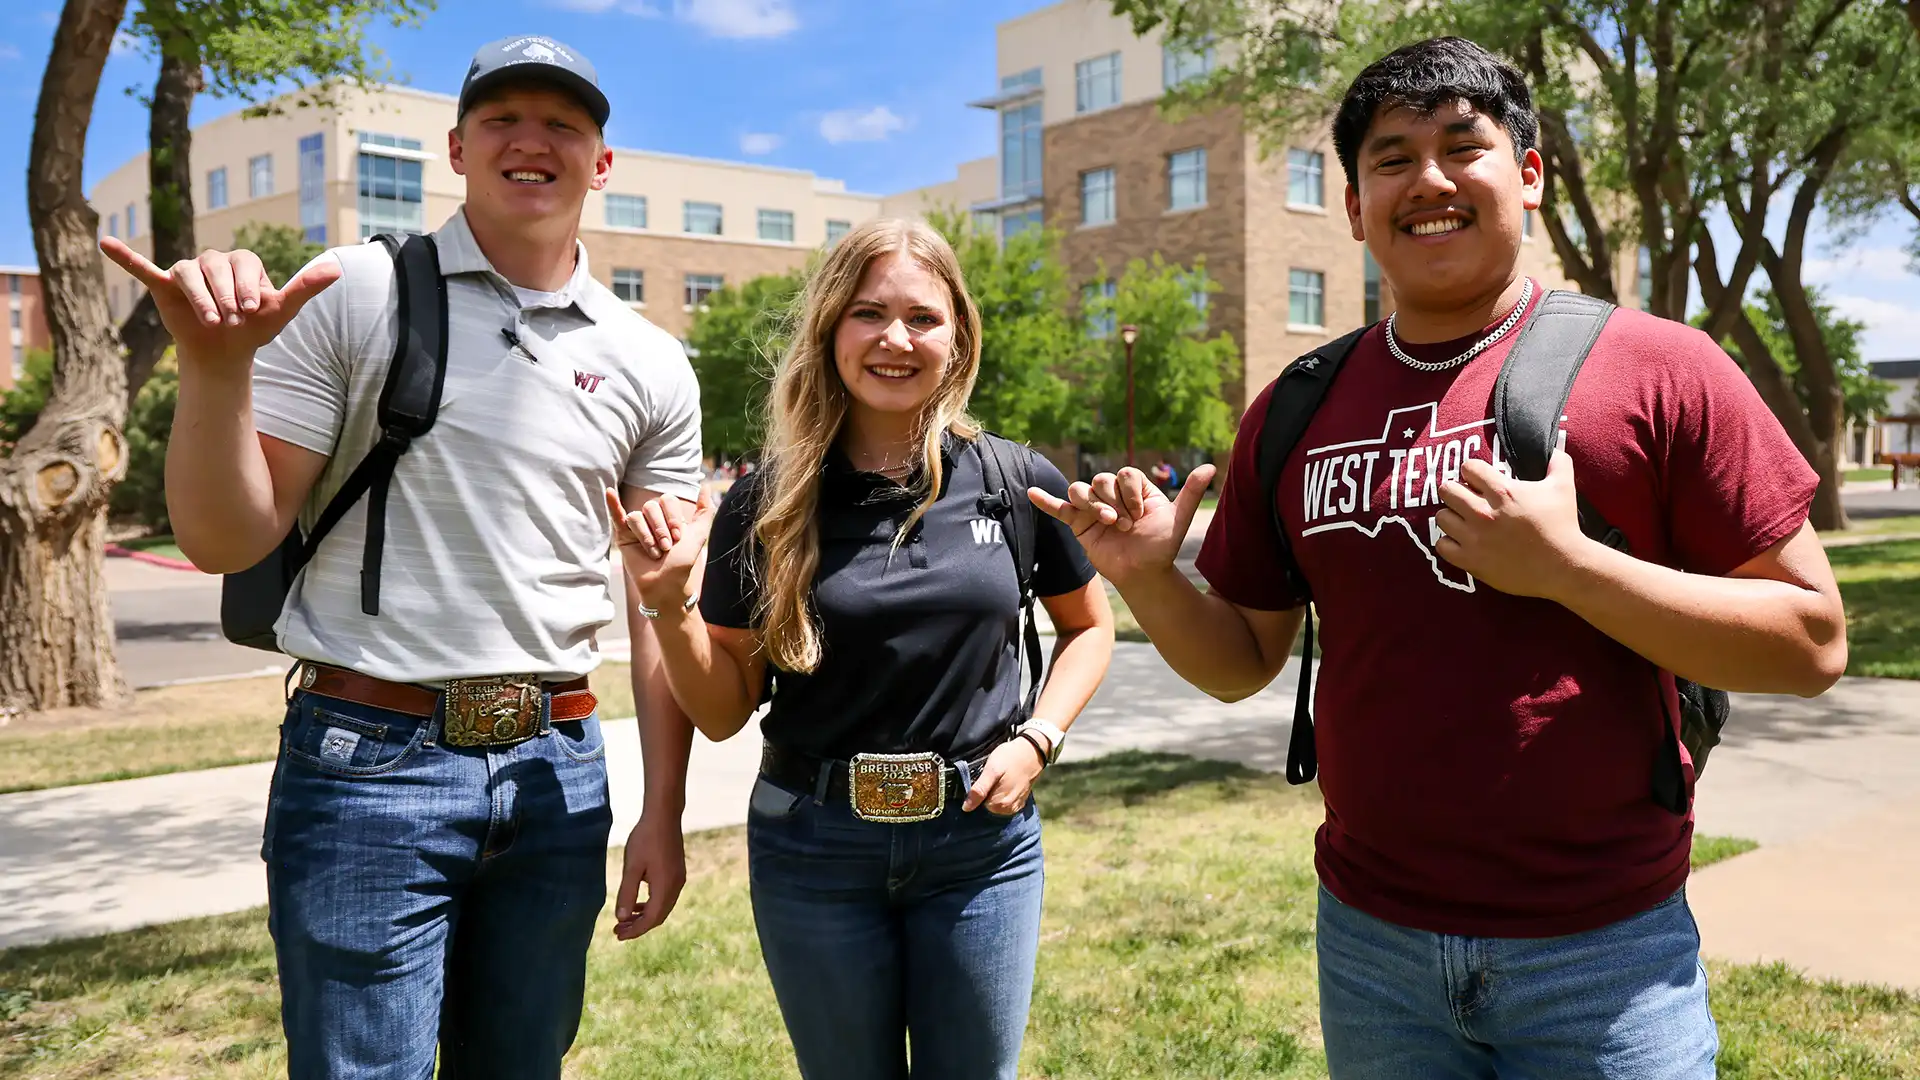 Texas A&M is the only public - Texas A&M University